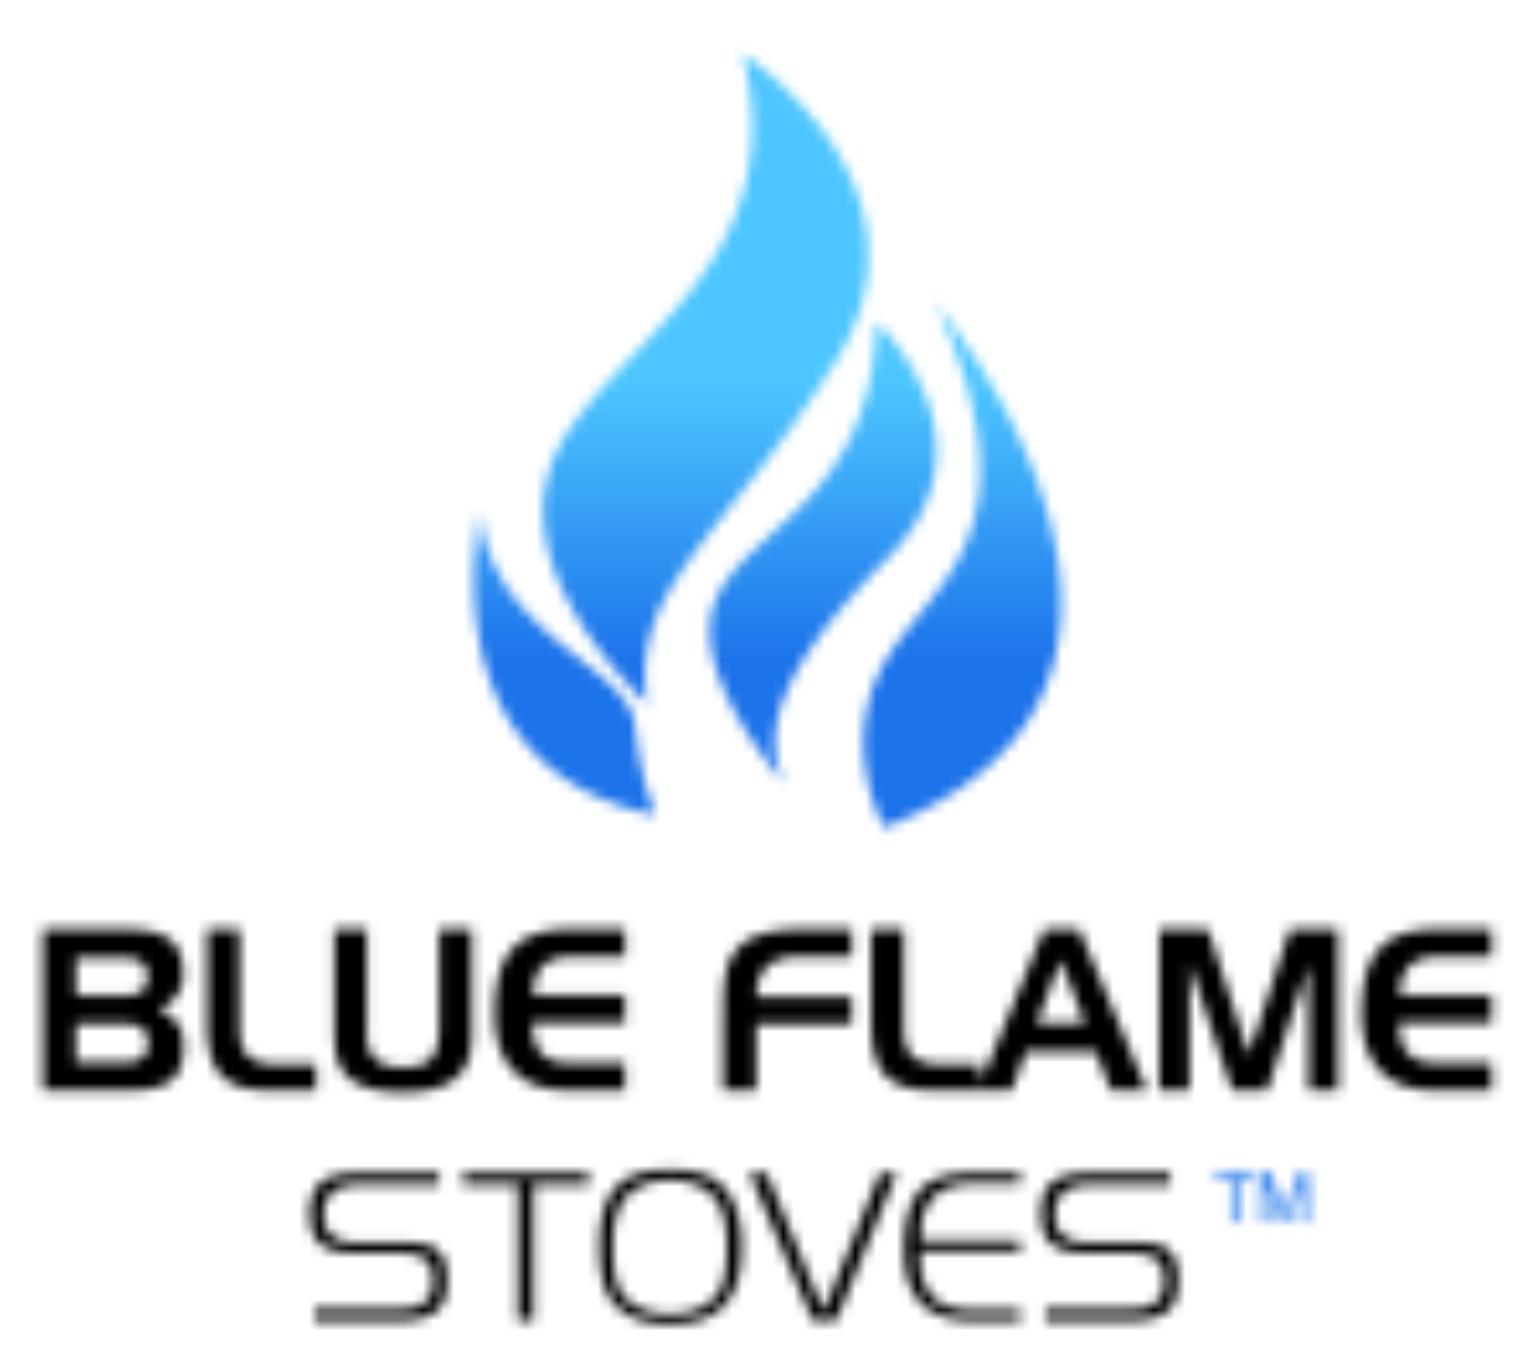 BLUE FLAME STOVES AS